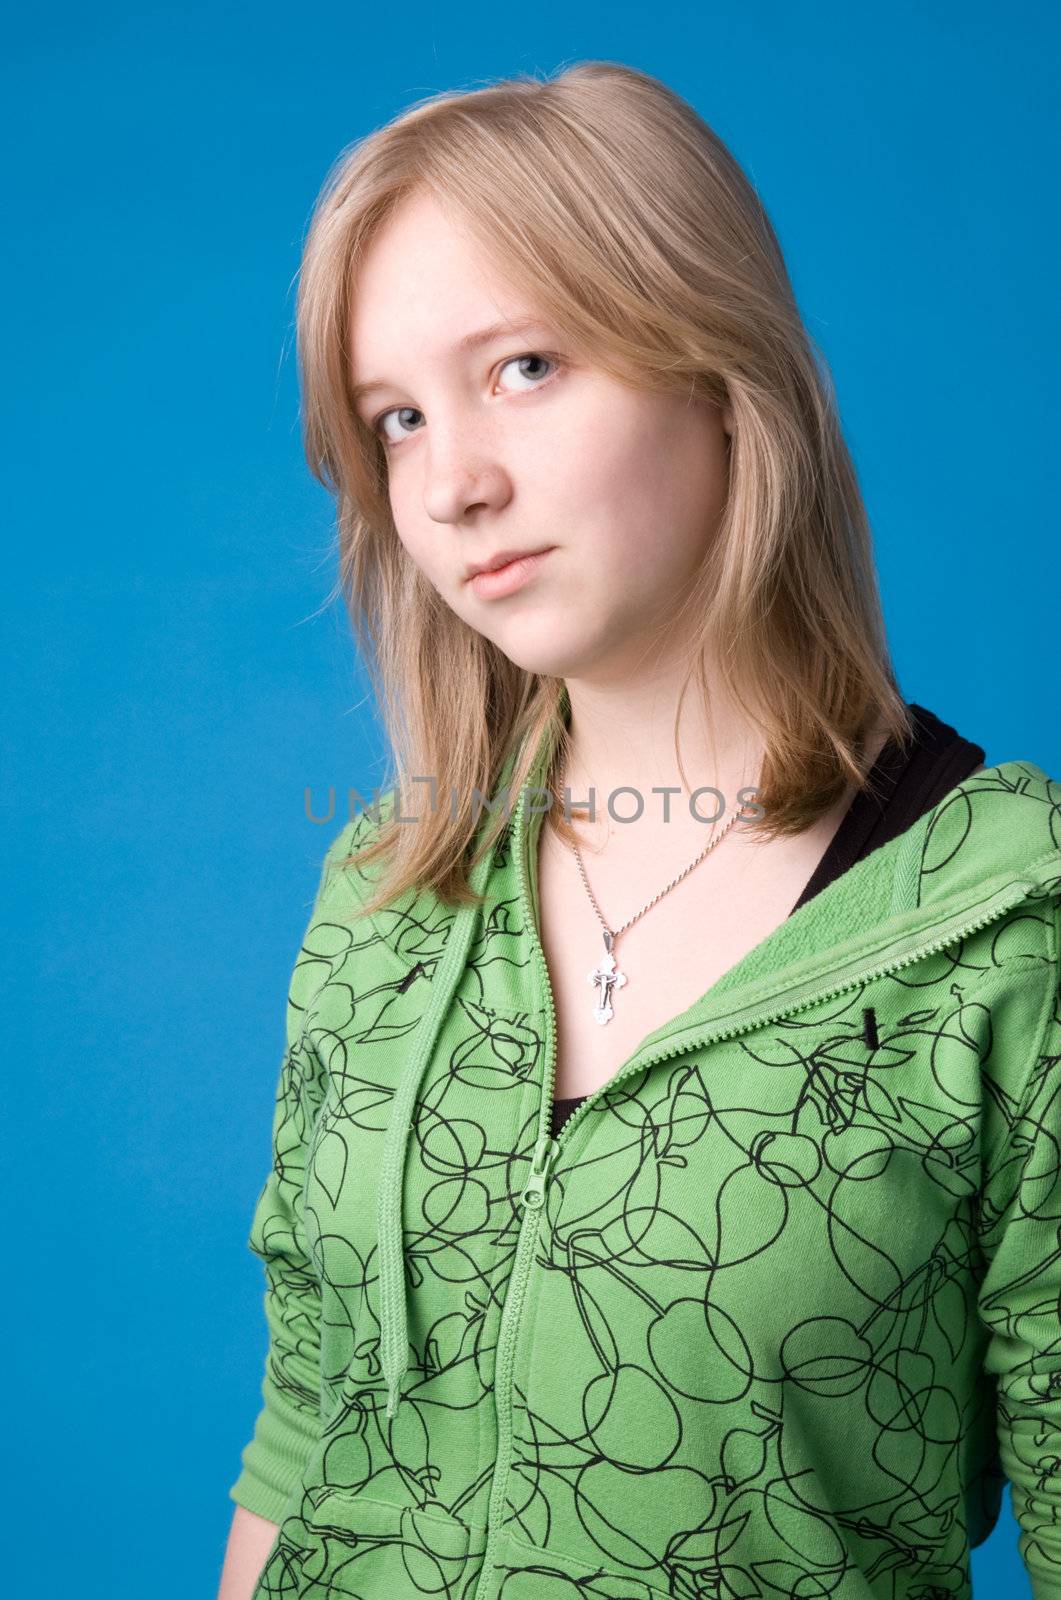 The young girl in green clothes on a dark blue background.